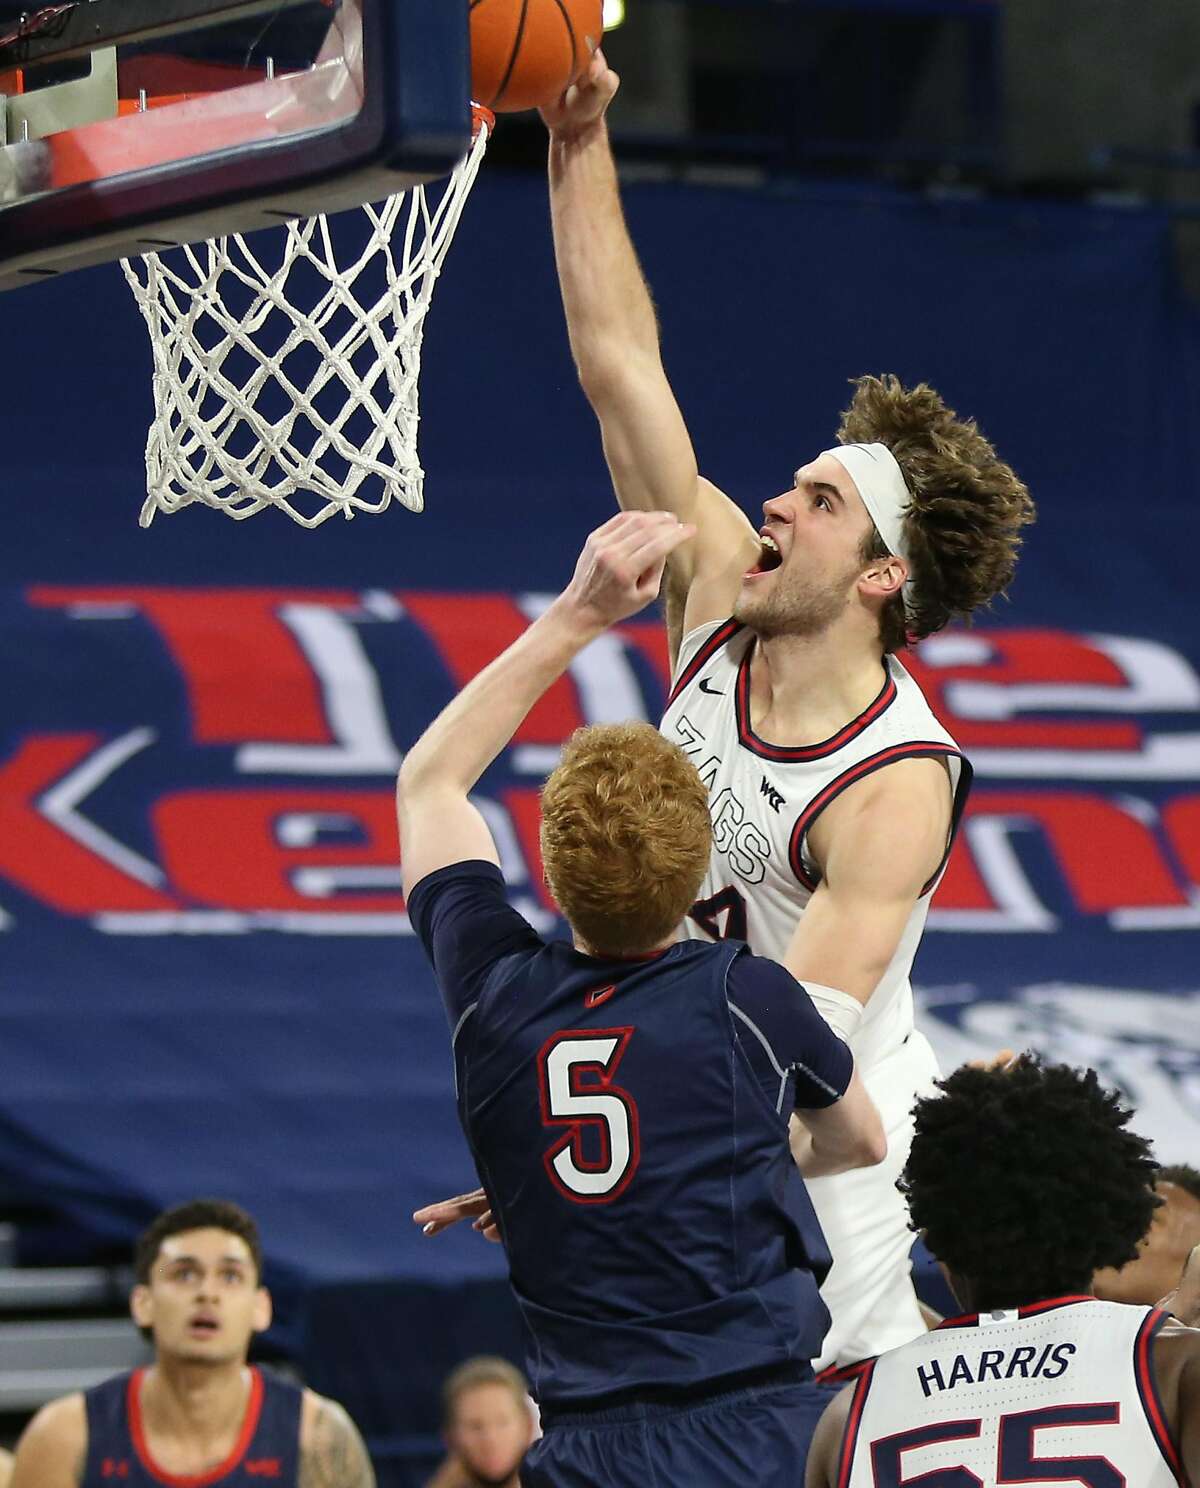 Jabe Mullins of St. Mary’s can’t stop Corey Kispert of top-ranked Gonzaga in Spokane, Wash.